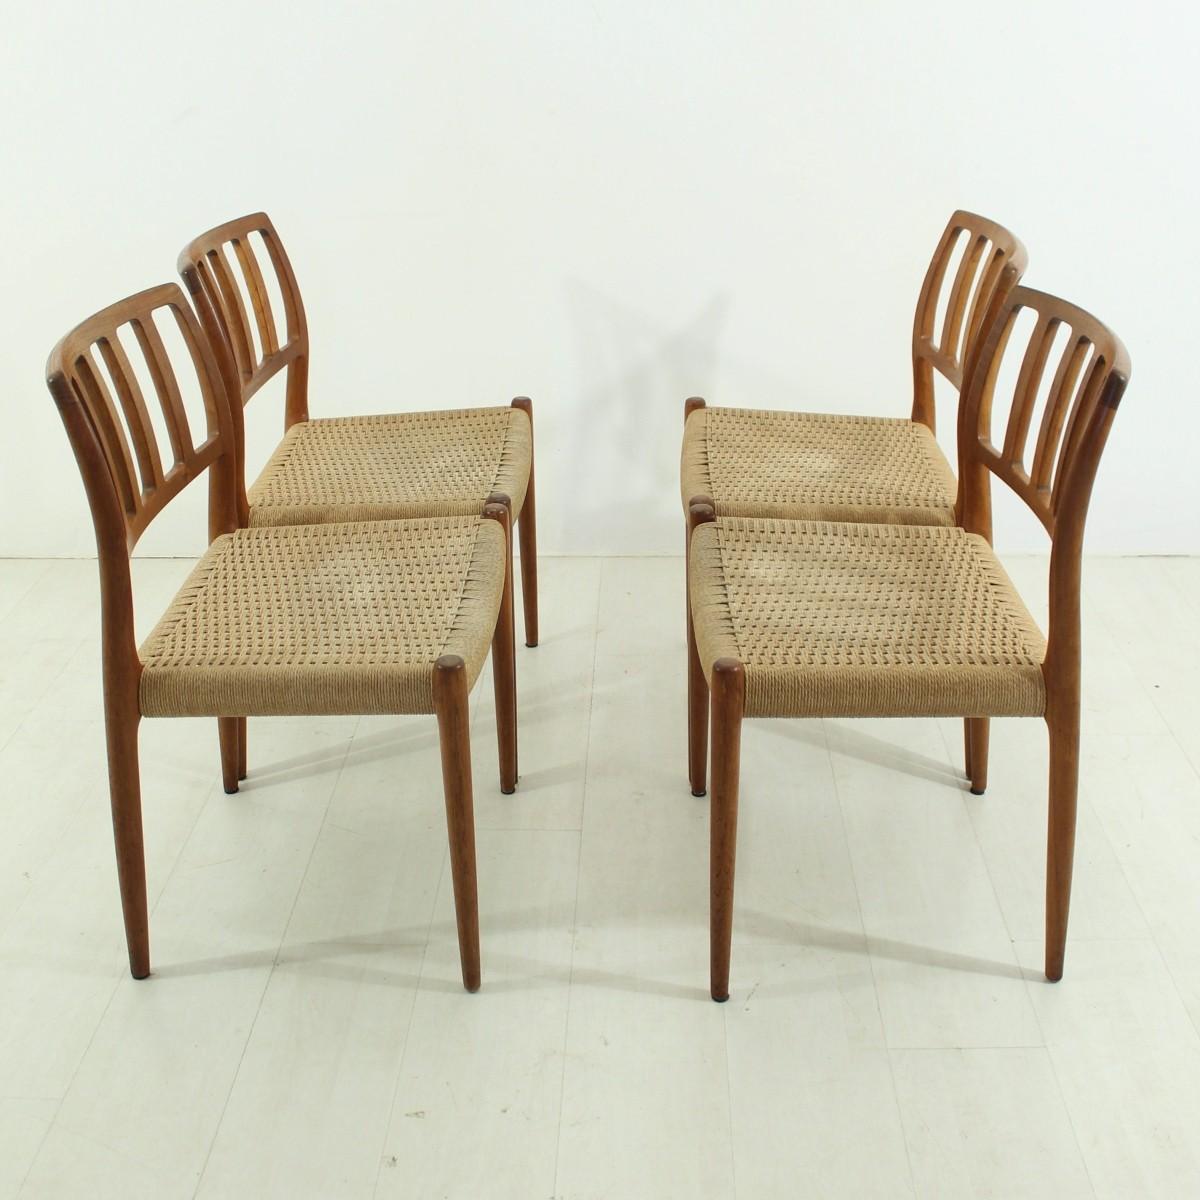 This set of four chairs are model 83 and were produced by J.L. Møllers.